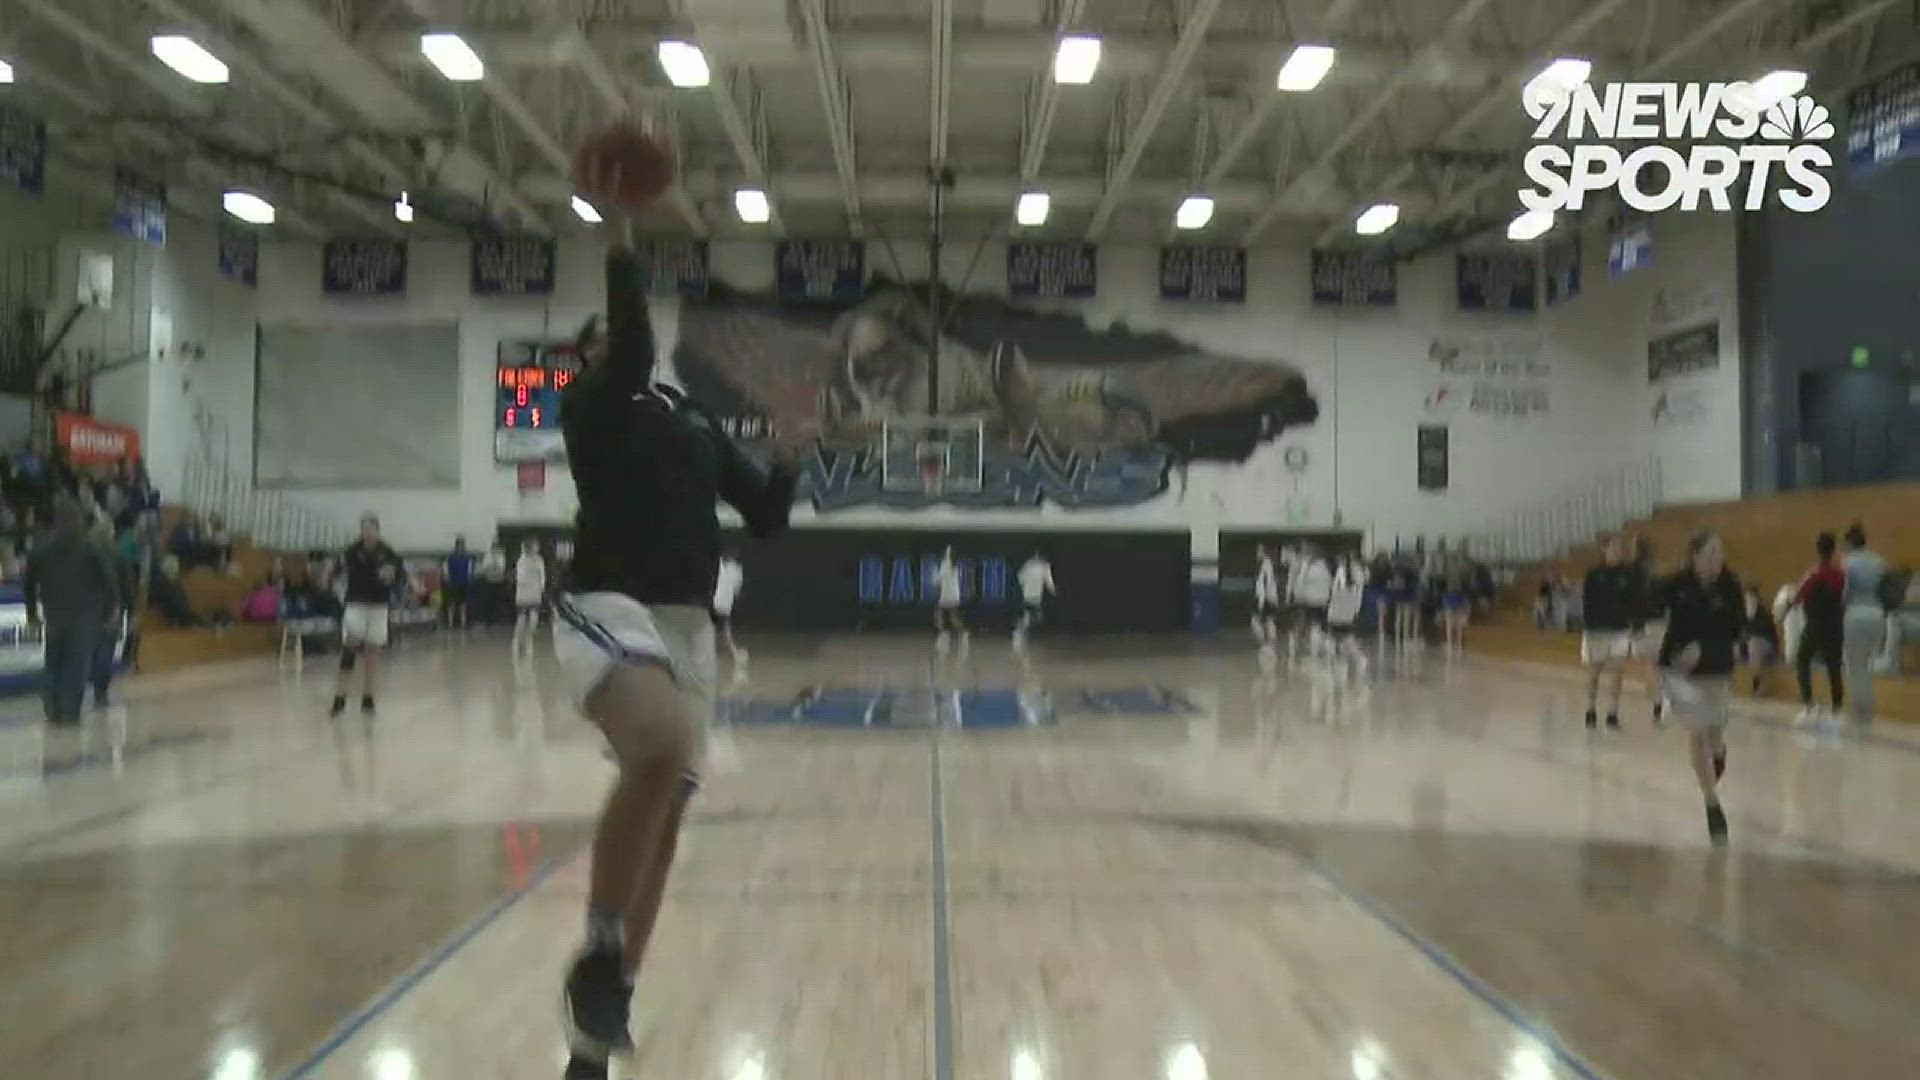 The No. 1 seeded Highlands Ranch Falcons cruised past the No. 17 seeded Dakota Ridge Eagles to advance to the Great 8.